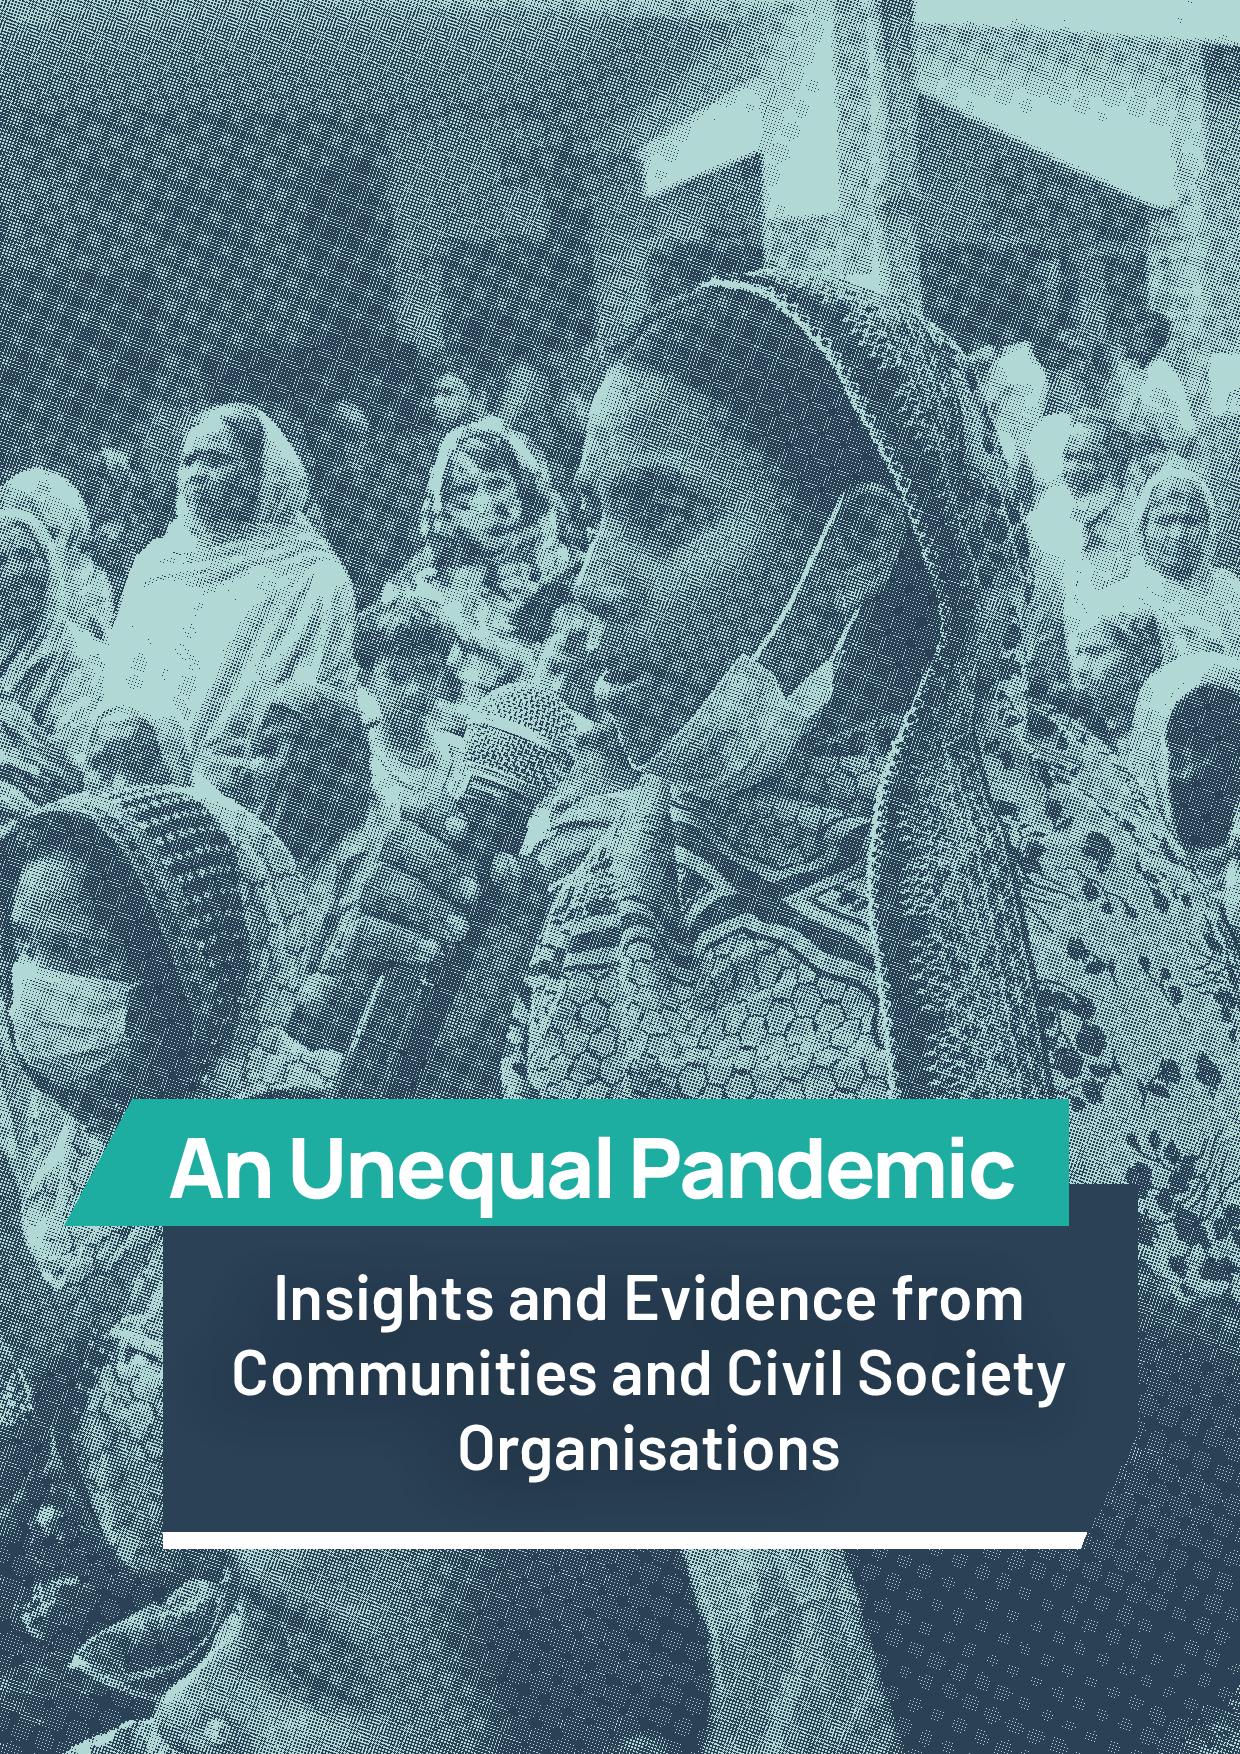  An Unequal Pandemic:   Insights and Evidence from Communities and Civil Society Organisations